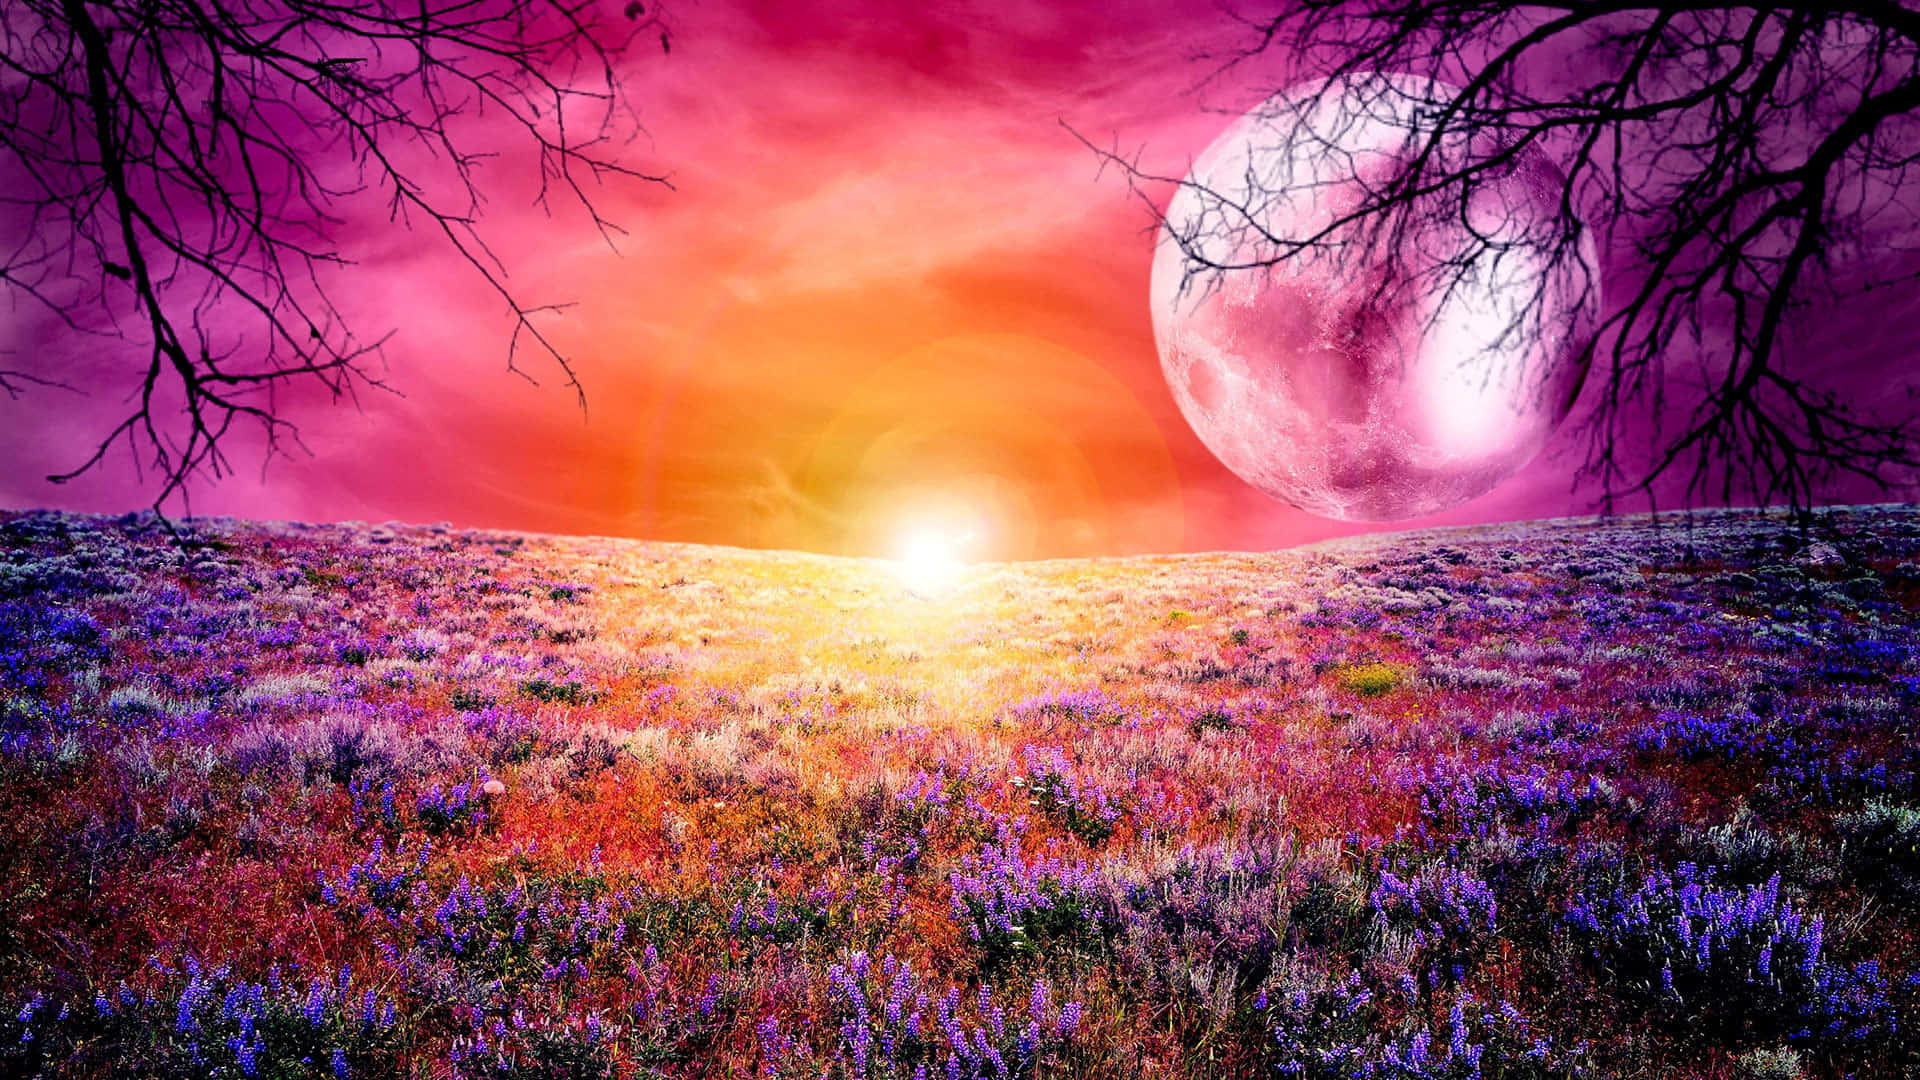 Pink Moon And Lavender Field Wallpaper